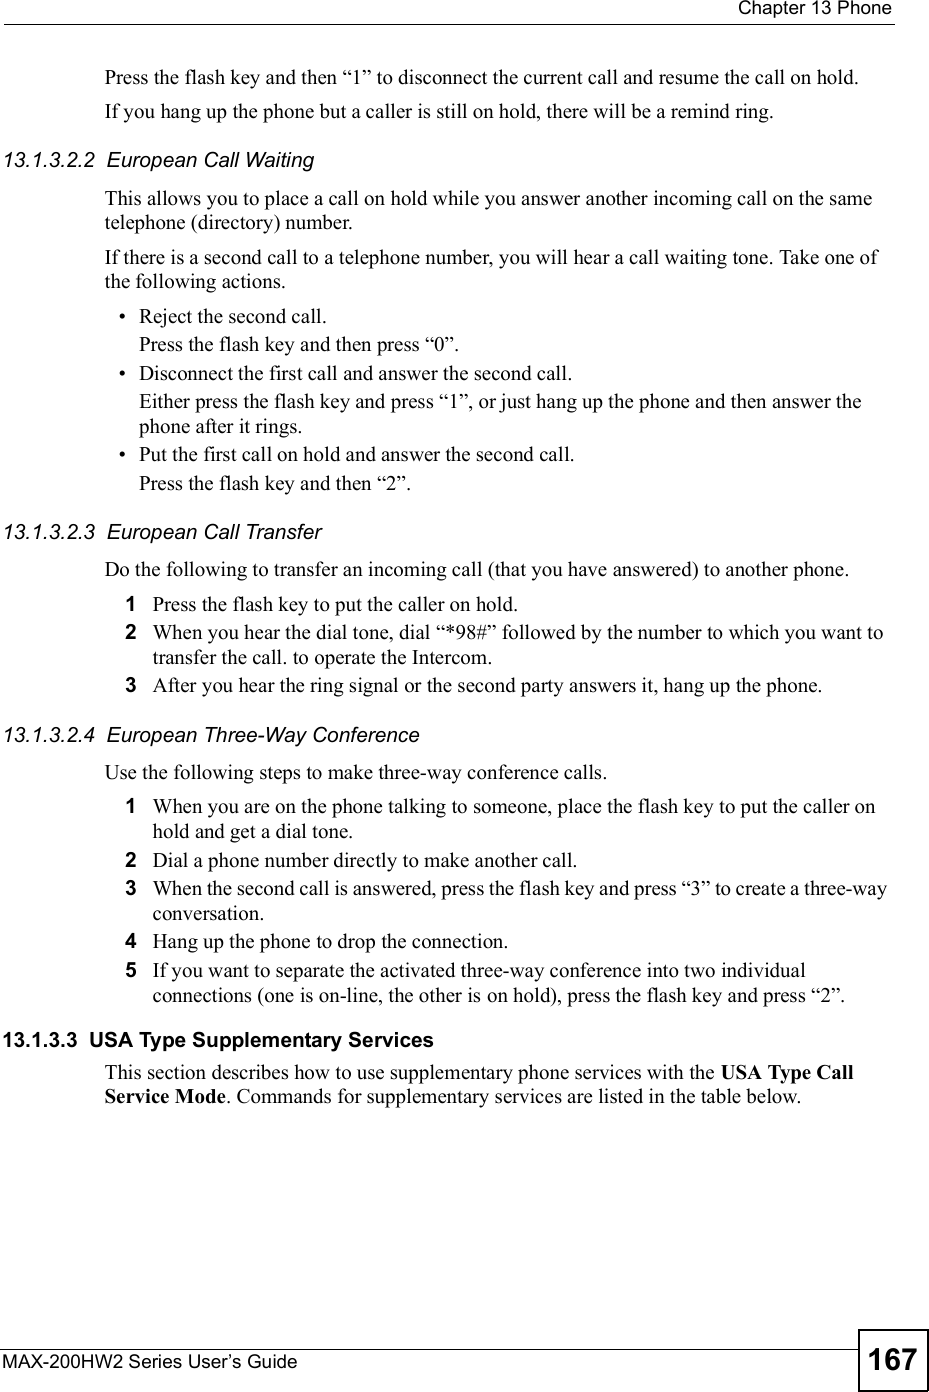  Chapter 13PhoneMAX-200HW2 Series User s Guide 167Press the flash key and then &quot;1# to disconnect the current call and resume the call on hold.If you hang up the phone but a caller is still on hold, there will be a remind ring.13.1.3.2.2  European Call Waiting This allows you to place a call on hold while you answer another incoming call on the same telephone (directory) number. If there is a second call to a telephone number, you will hear a call waiting tone. Take one of the following actions. Reject the second call.Press the flash key and then press &quot;0#. Disconnect the first call and answer the second call.Either press the flash key and press &quot;1#, or just hang up the phone and then answer the phone after it rings. Put the first call on hold and answer the second call.Press the flash key and then &quot;2#.13.1.3.2.3  European Call TransferDo the following to transfer an incoming call (that you have answered) to another phone.1Press the flash key to put the caller on hold.2When you hear the dial tone, dial &quot;*98## followed by the number to which you want to transfer the call. to operate the Intercom.3After you hear the ring signal or the second party answers it, hang up the phone.13.1.3.2.4  European Three-Way ConferenceUse the following steps to make three-way conference calls.1When you are on the phone talking to someone, place the flash key to put the caller on hold and get a dial tone. 2Dial a phone number directly to make another call.3When the second call is answered, press the flash key and press &quot;3# to create a three-way conversation.4Hang up the phone to drop the connection.5If you want to separate the activated three-way conference into two individual connections (one is on-line, the other is on hold), press the flash key and press &quot;2#.13.1.3.3  USA Type Supplementary ServicesThis section describes how to use supplementary phone services with the USA TypeCallService Mode. Commands for supplementary services are listed in the table below.